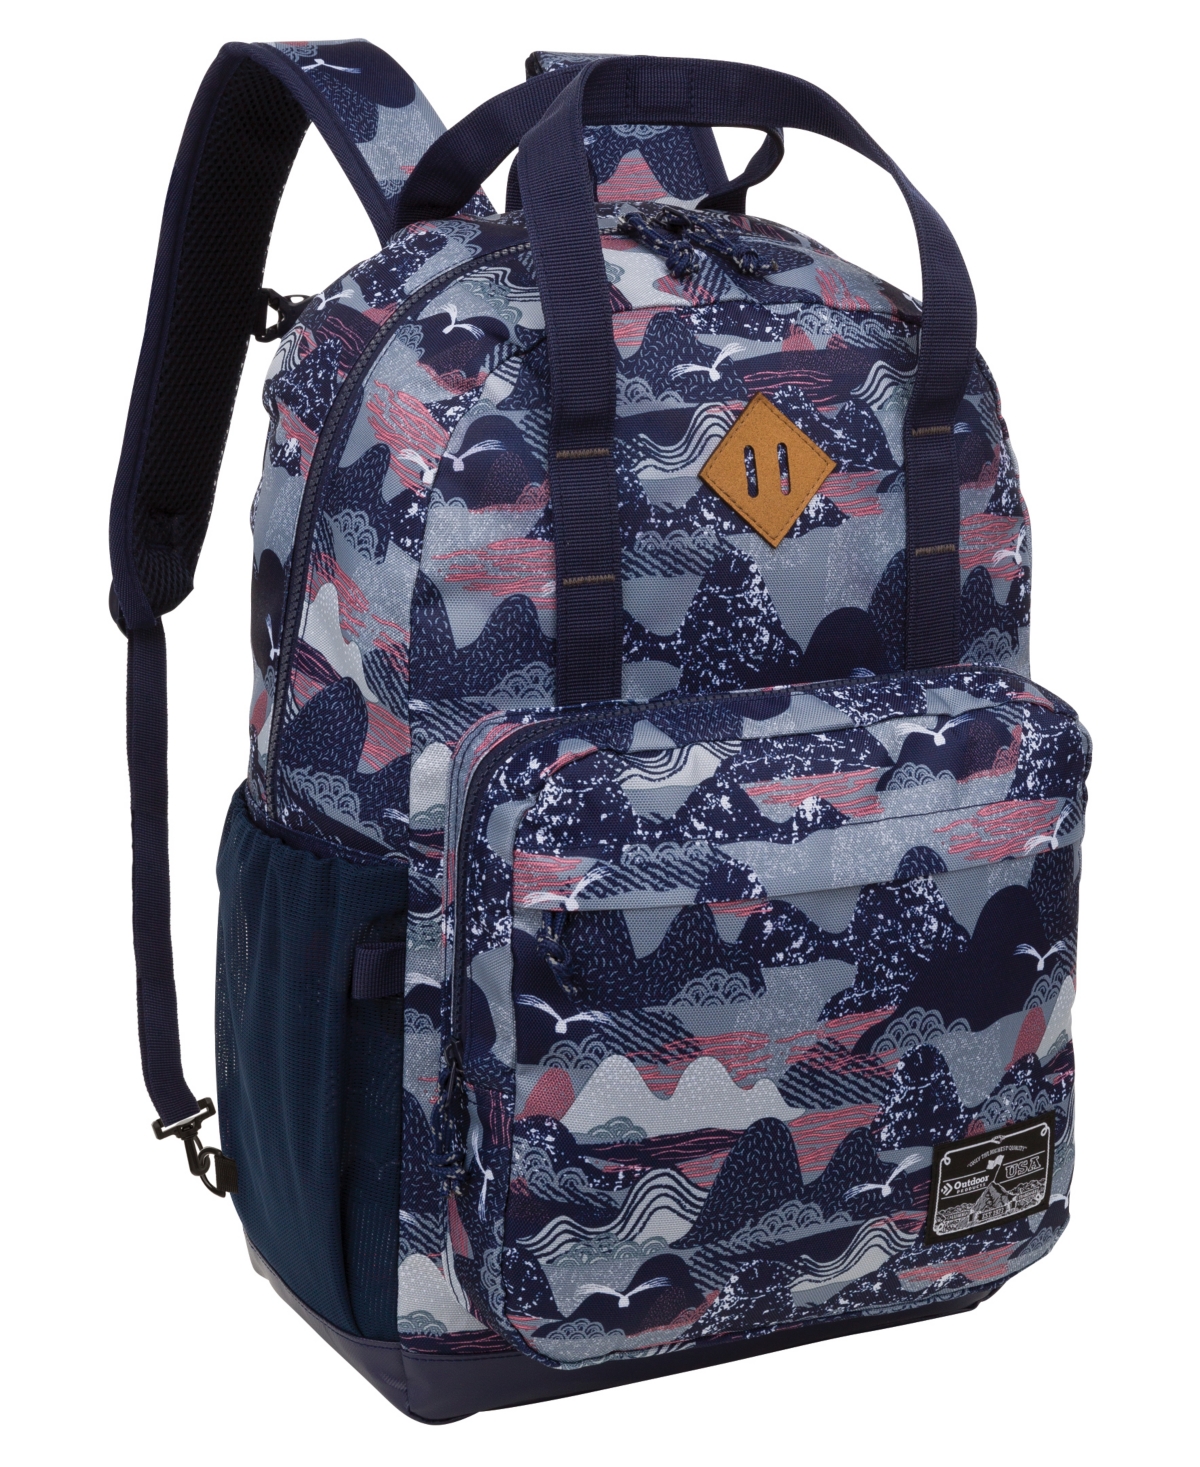 Larchmont Grab Backpack - Pattern